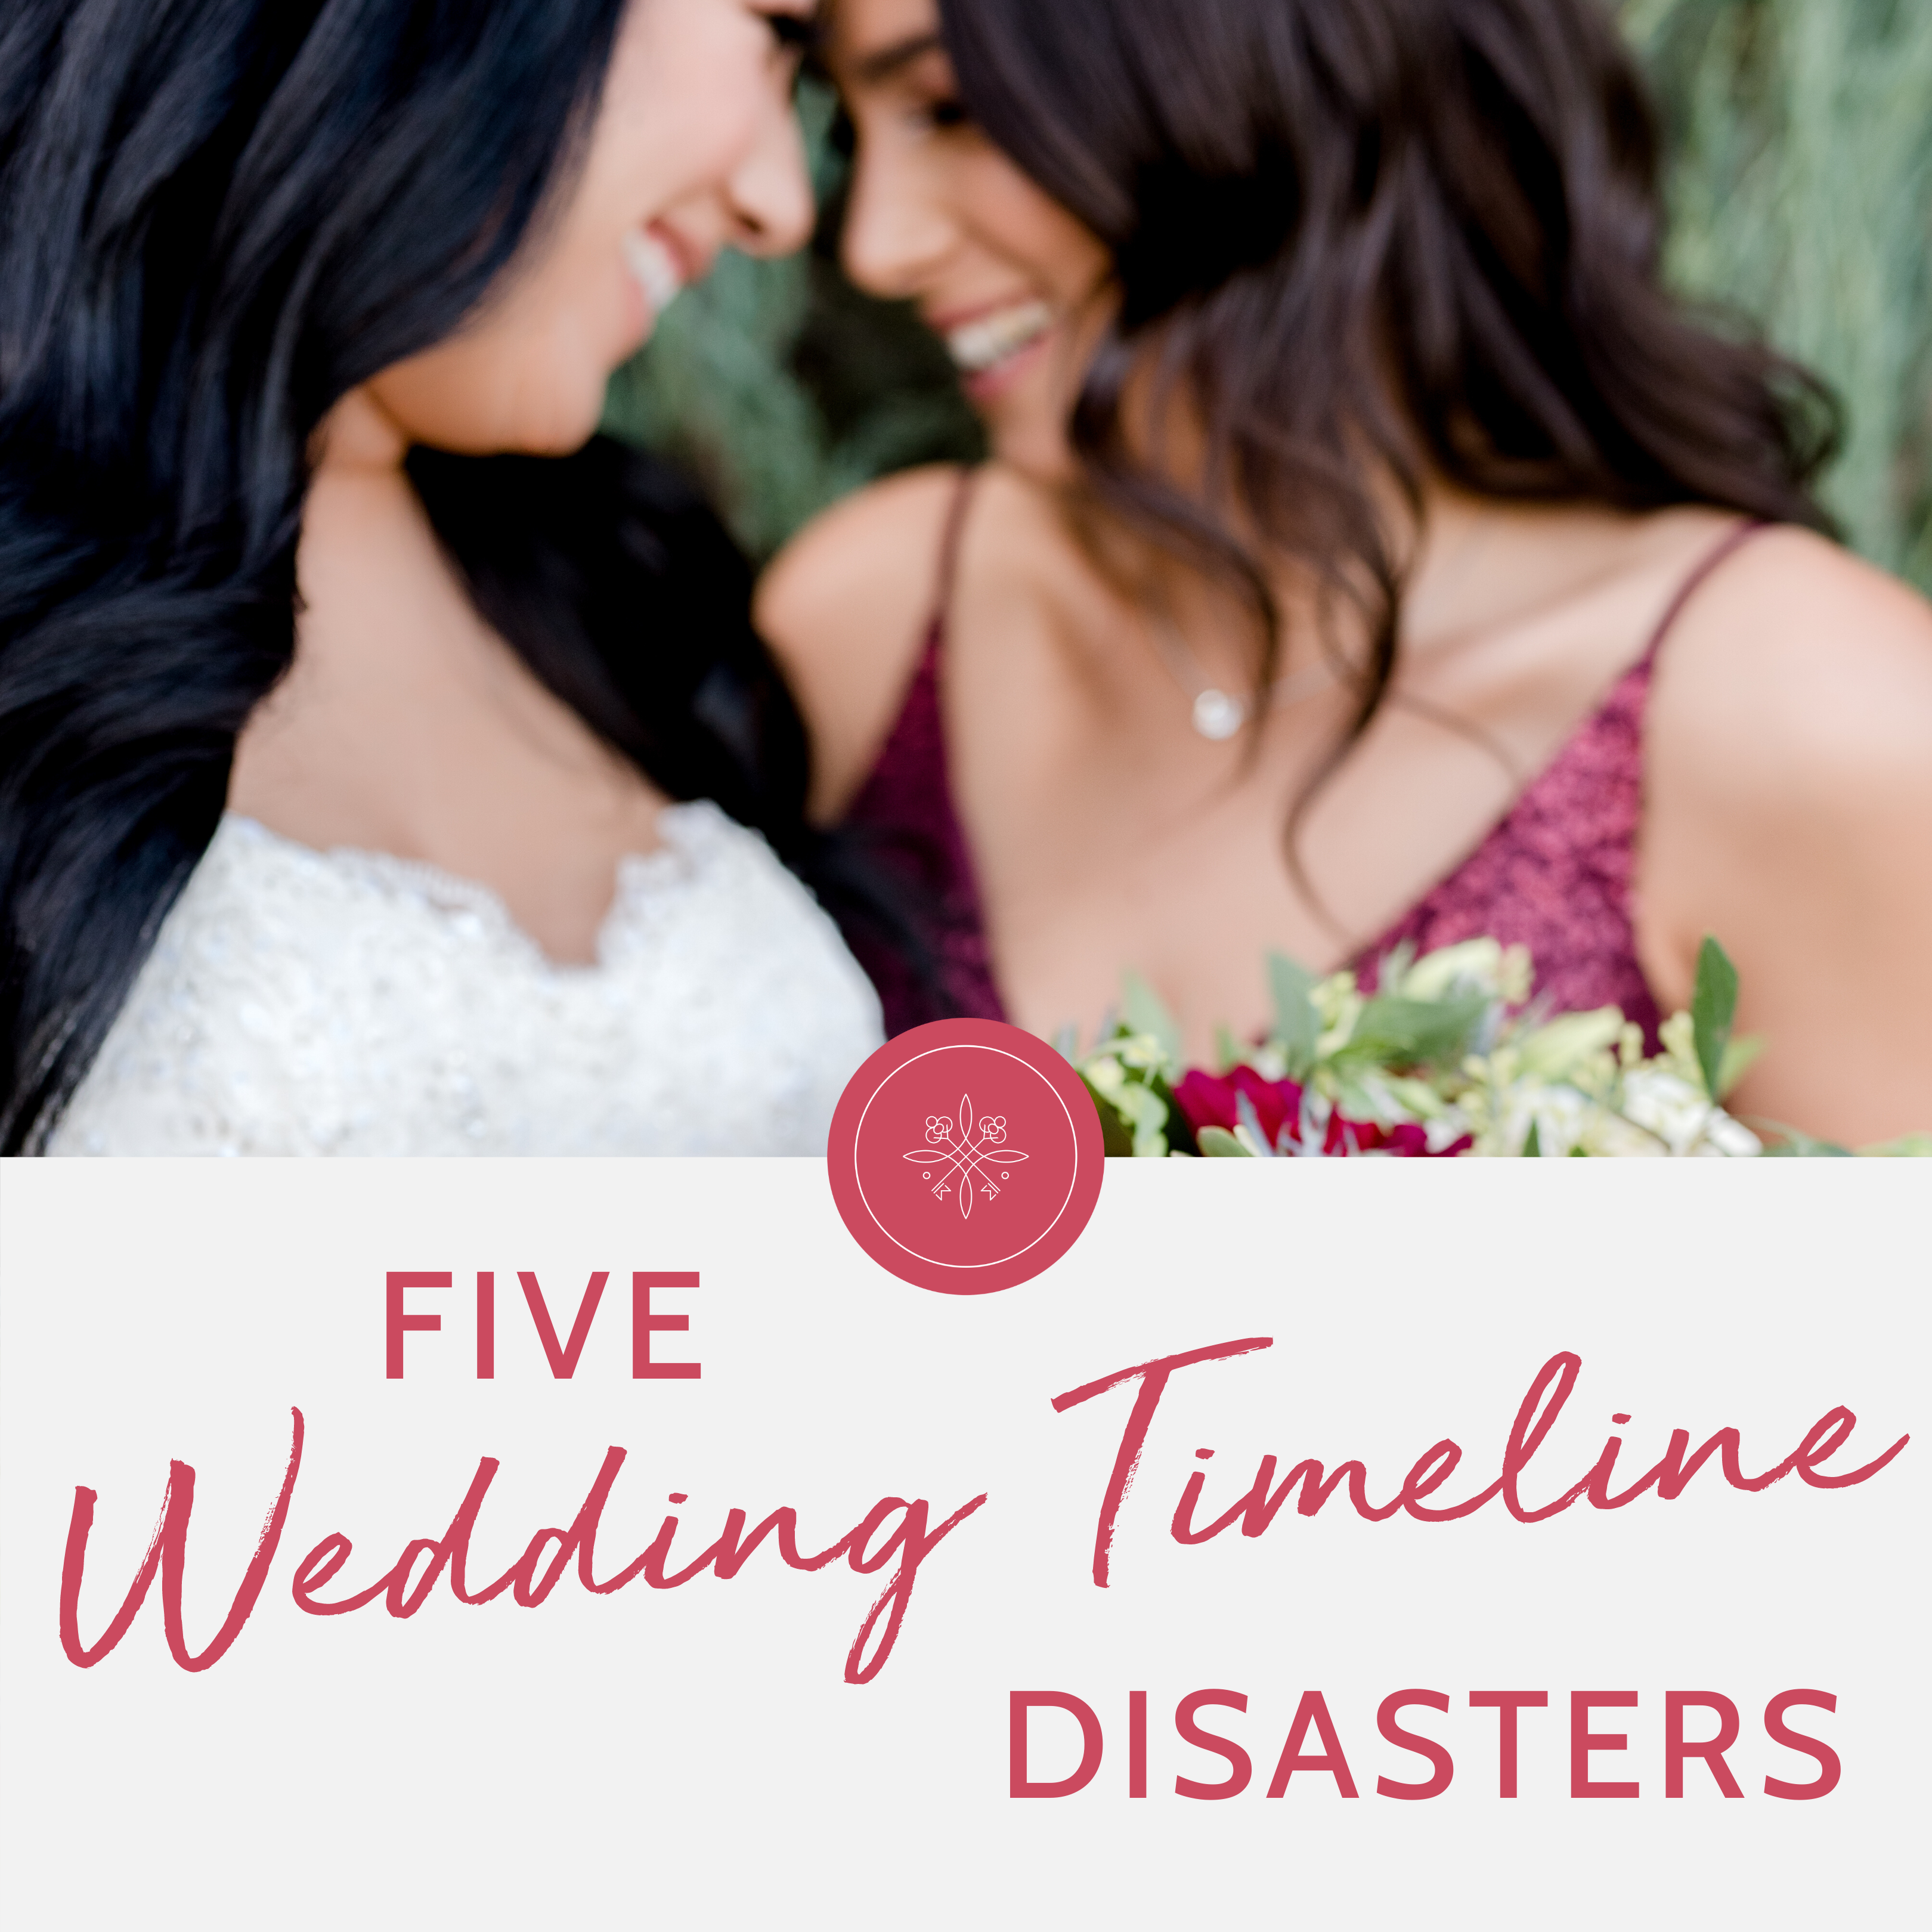 5 Wedding Timeline Disasters | Quianna Marie